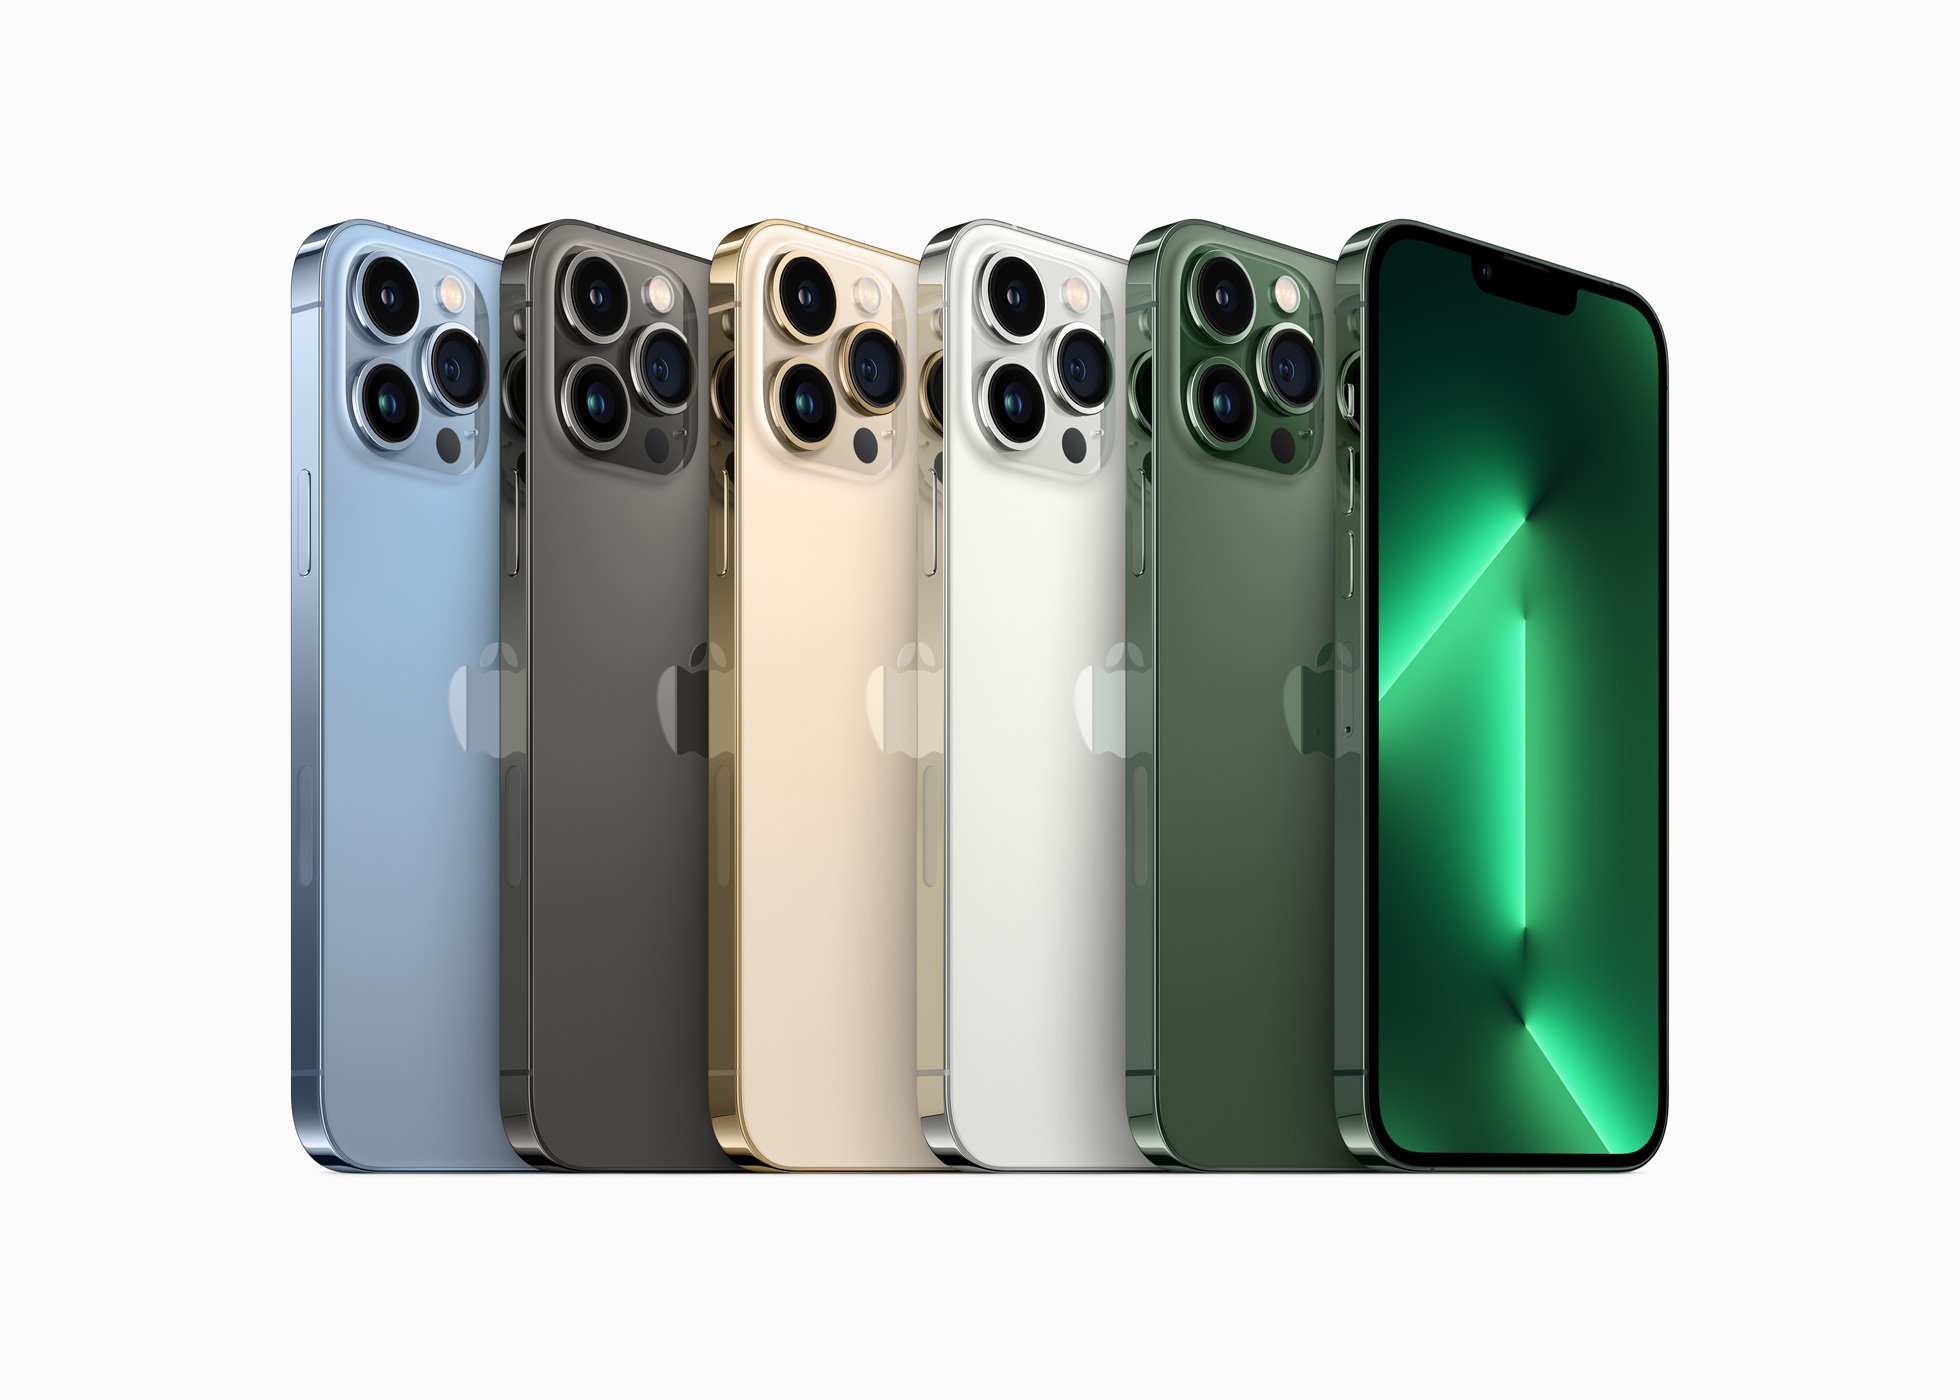 Which iPhone colour is most attractive?